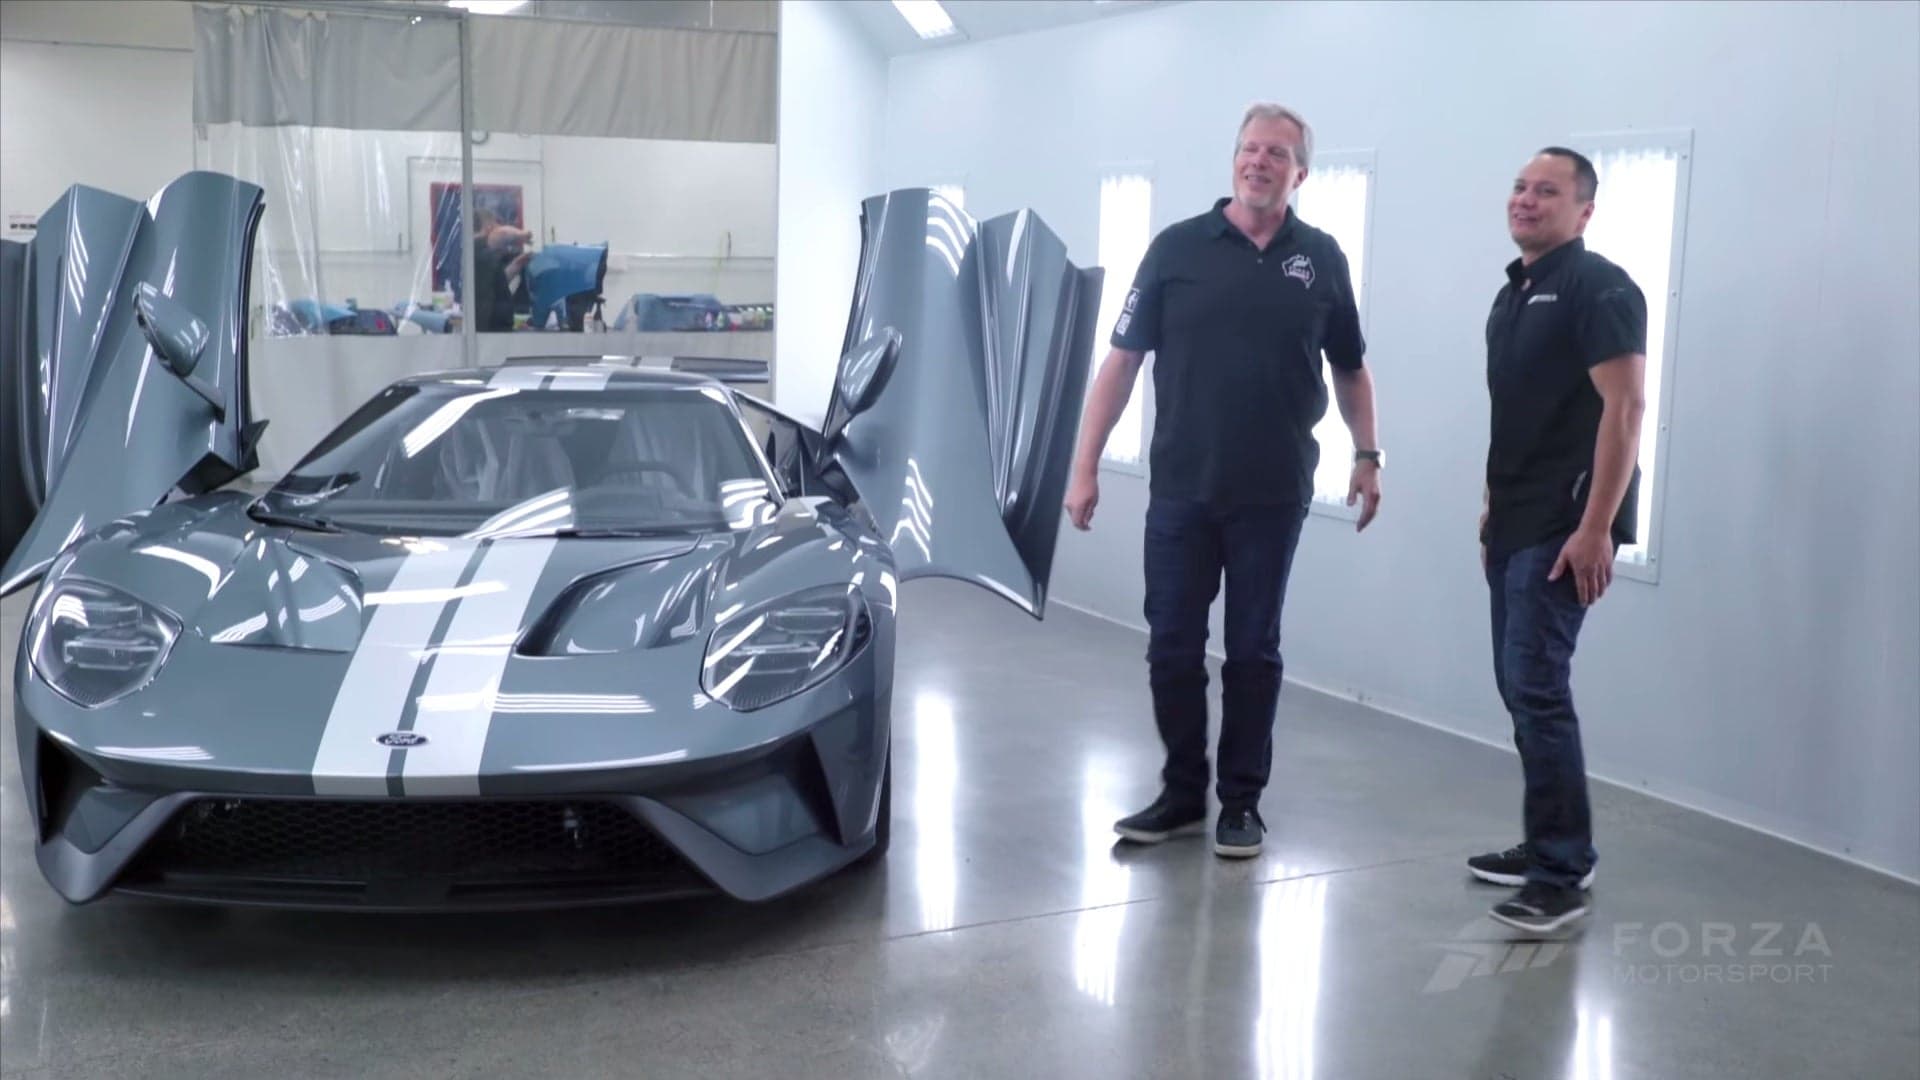 Take a Tour of the Ford GT Plant With Forza Boss Alan Hartman